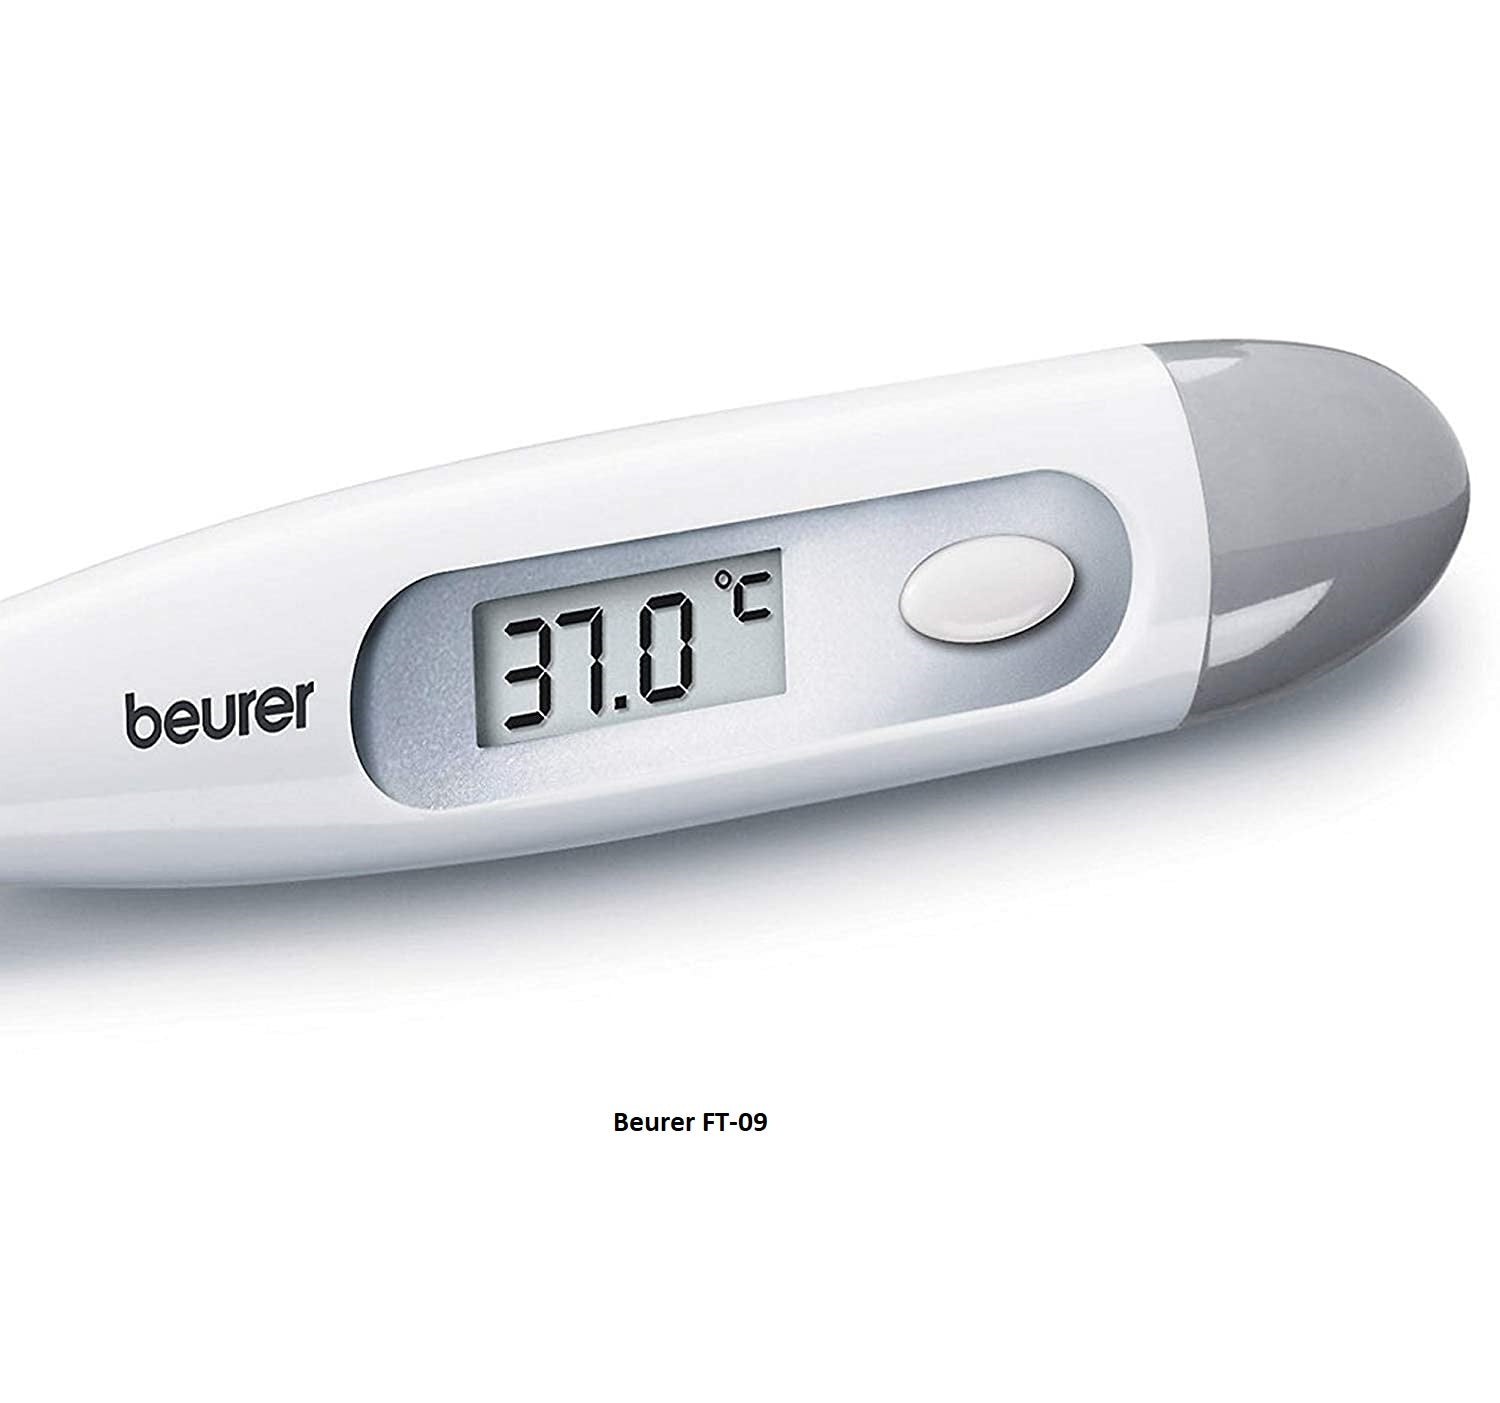 Beurer Clinical Thermometer FT-09